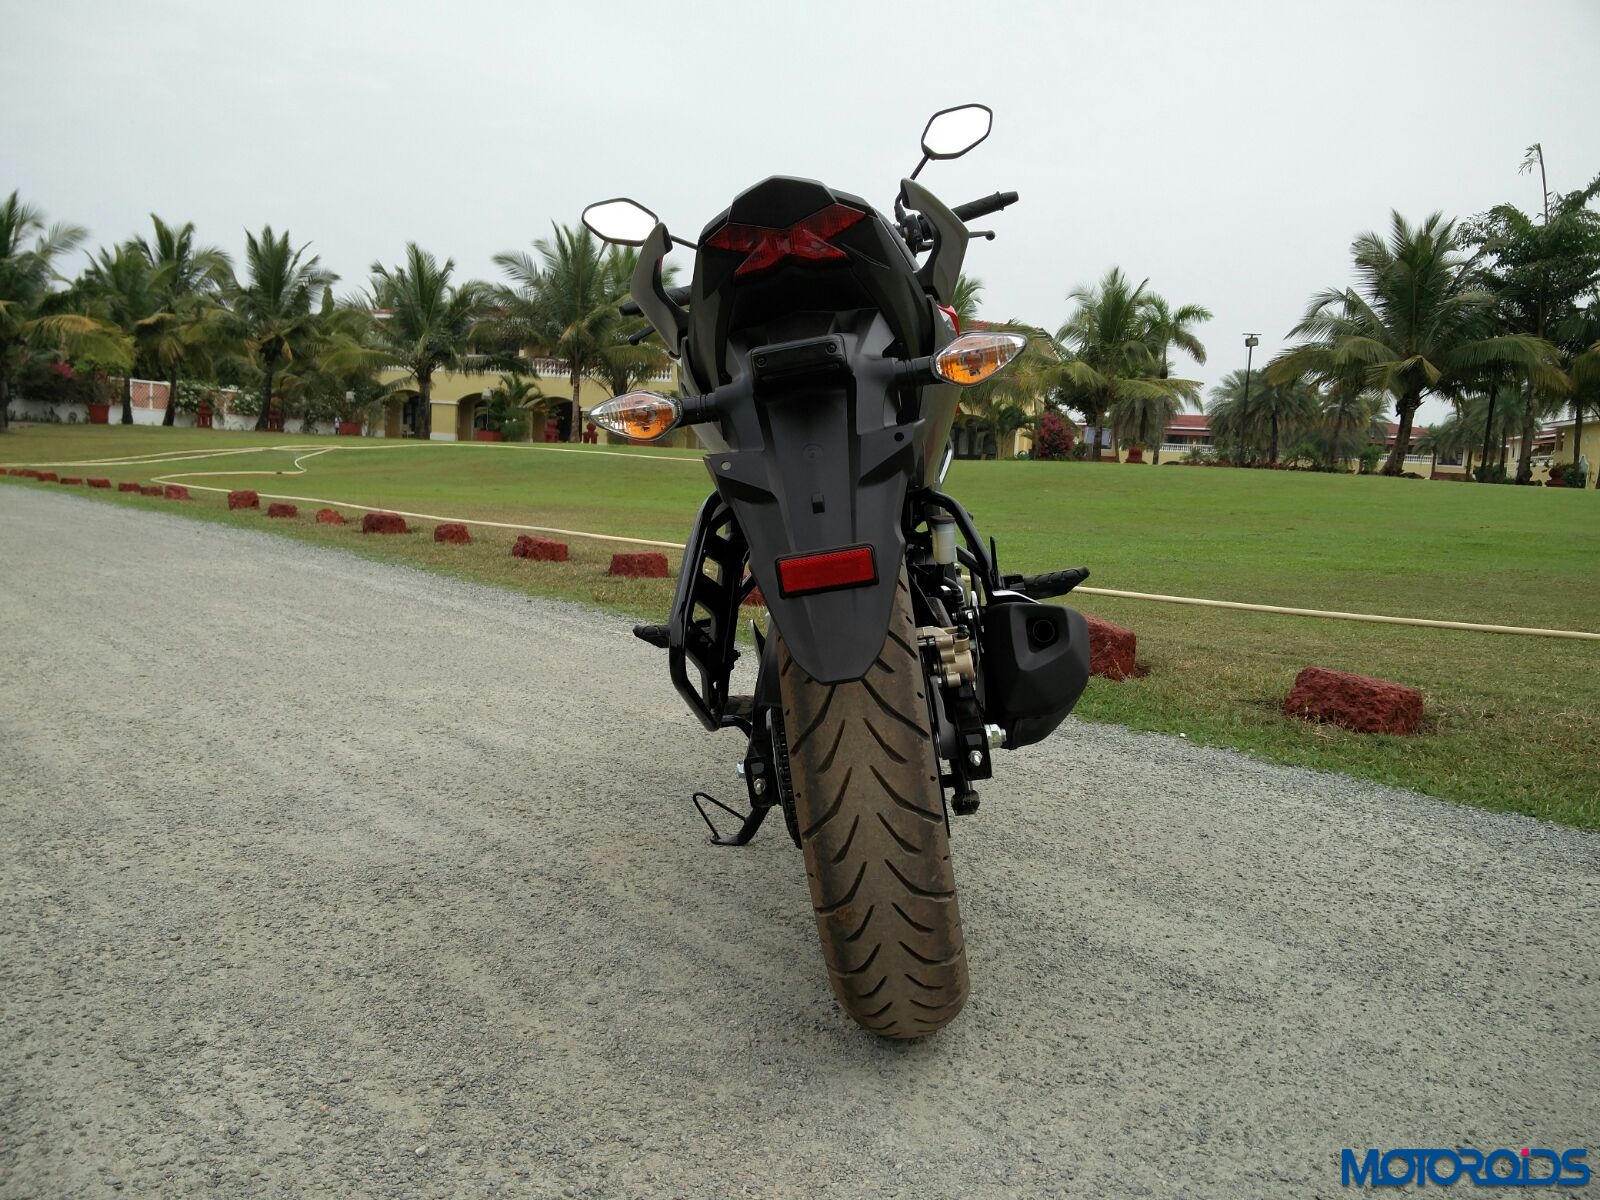 Honda Cb Hornet 160r First Ride Review Images Specs And Details Dressy Diligence Motoroids